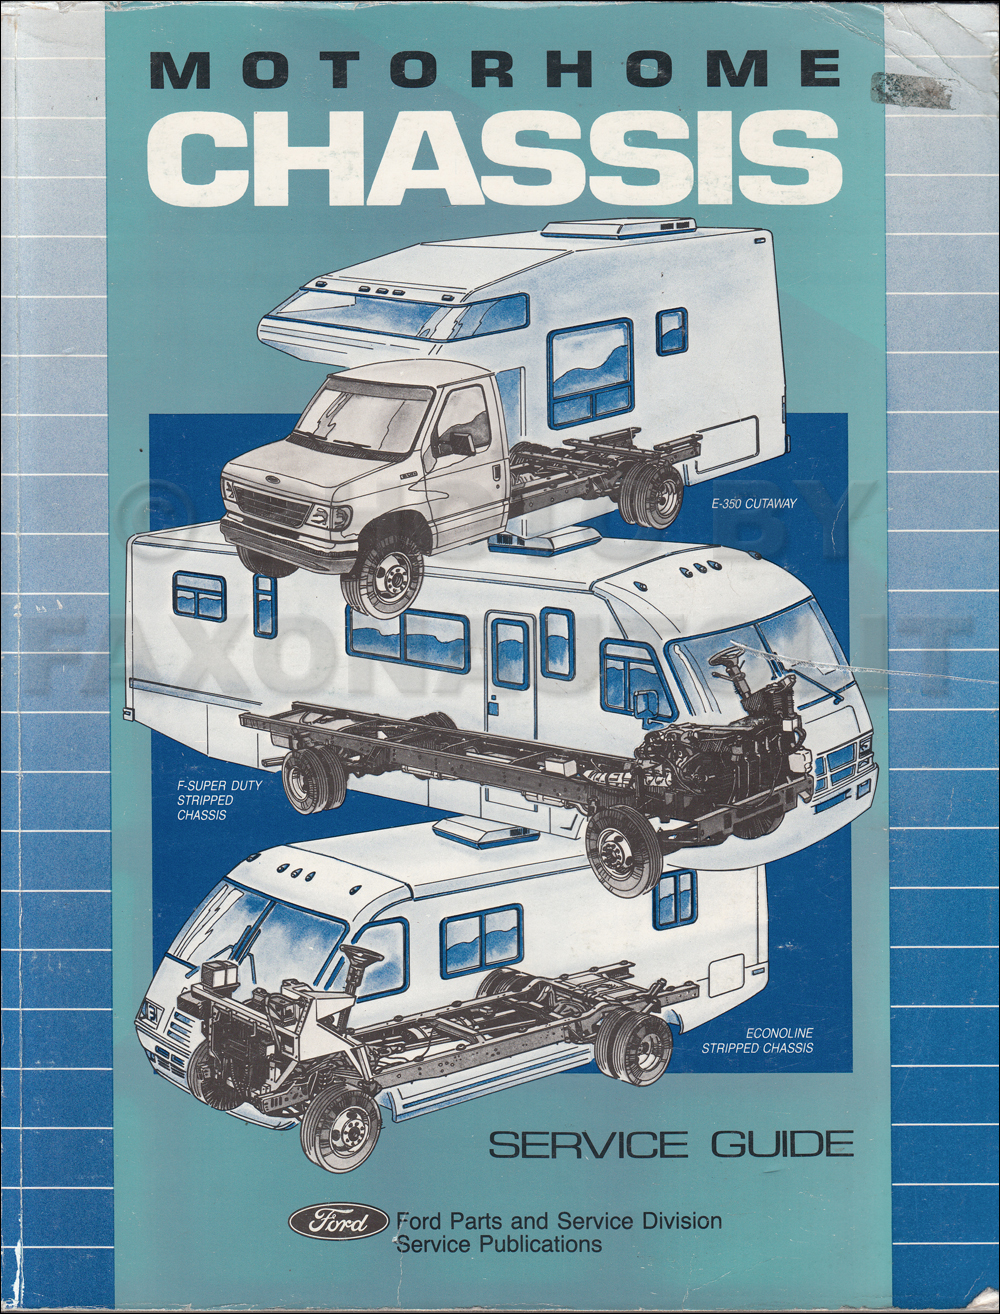 1992 Ford Motorhome Chassis Service Guide Original